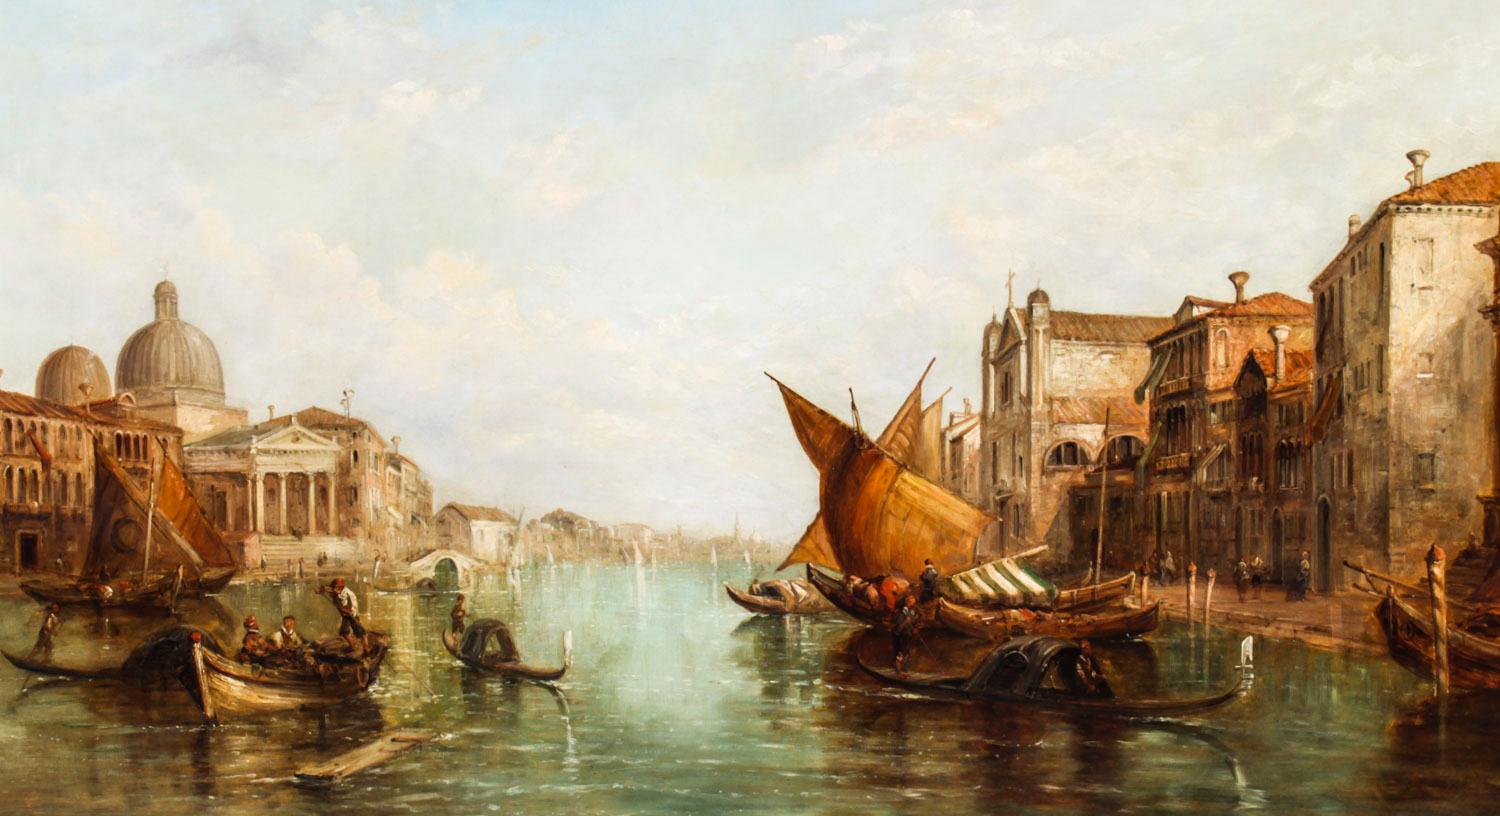 This is a large and beautiful oil on canvas painting of the Grand Canal with a view of San Simeone Piccolo by the renowned British artist Alfred Pollentine (1836-1890), signed and dated '77 on the lower right.

This beautiful waterscape captures a